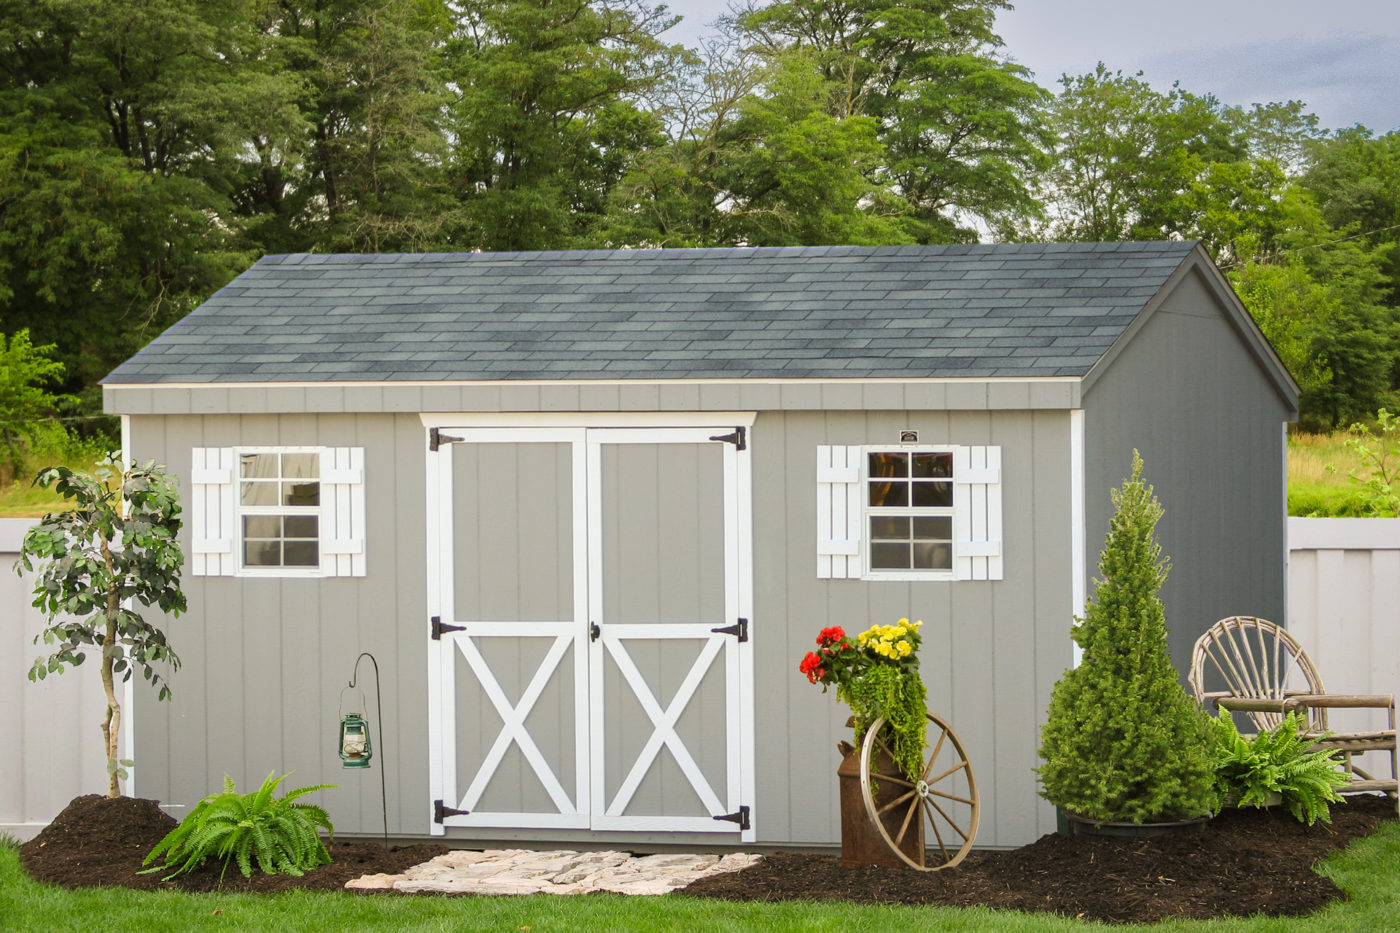 A Standard shed from Sheds Unlimited